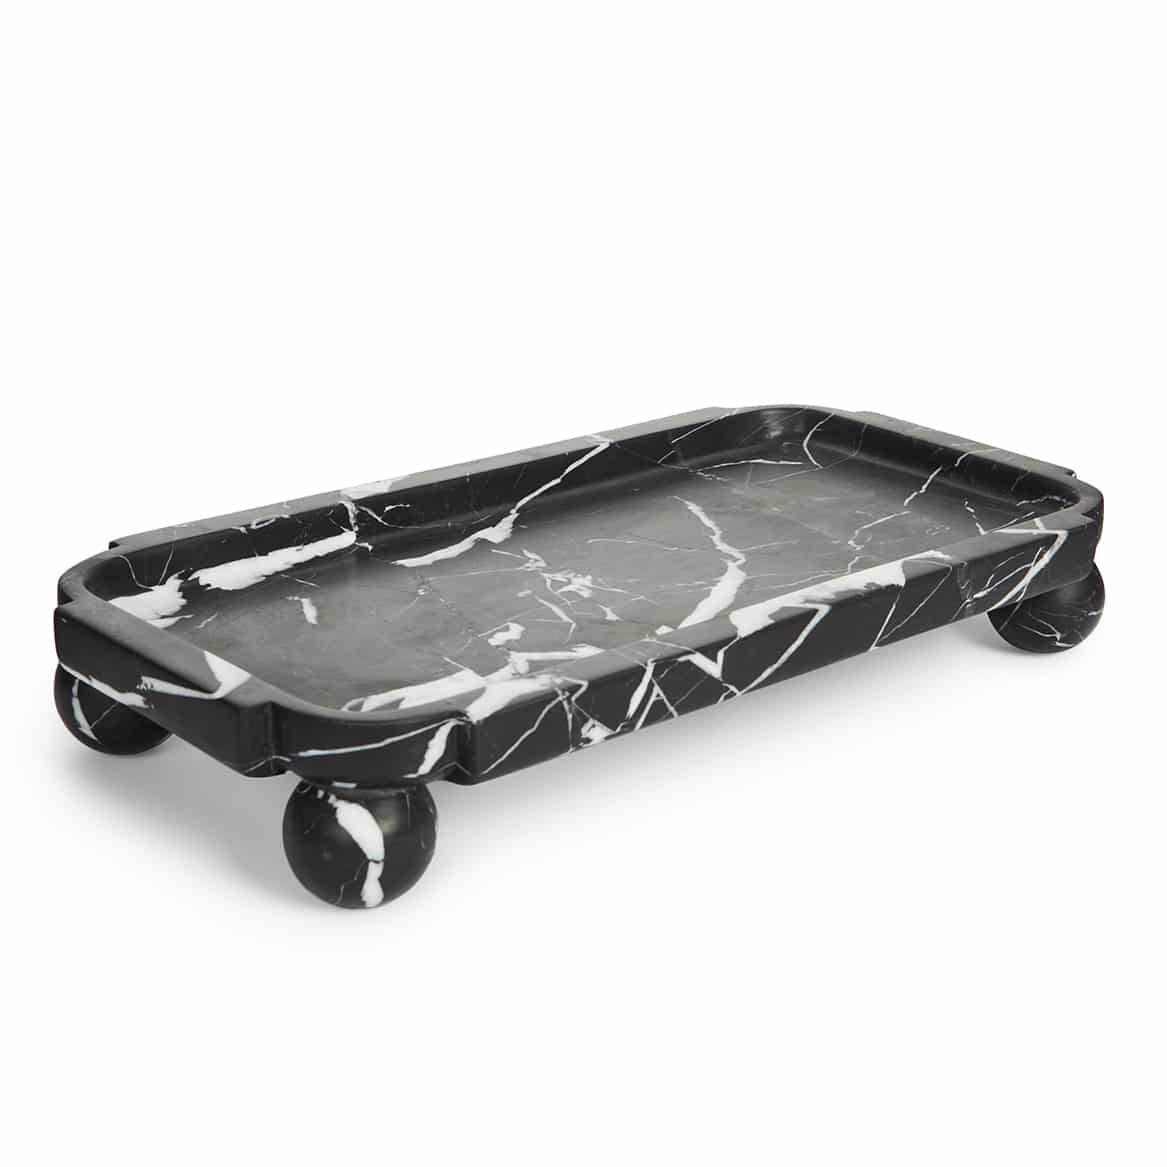 https://shop.thecoolhunter.net/wp-content/uploads/2021/12/marble_tray1.jpg